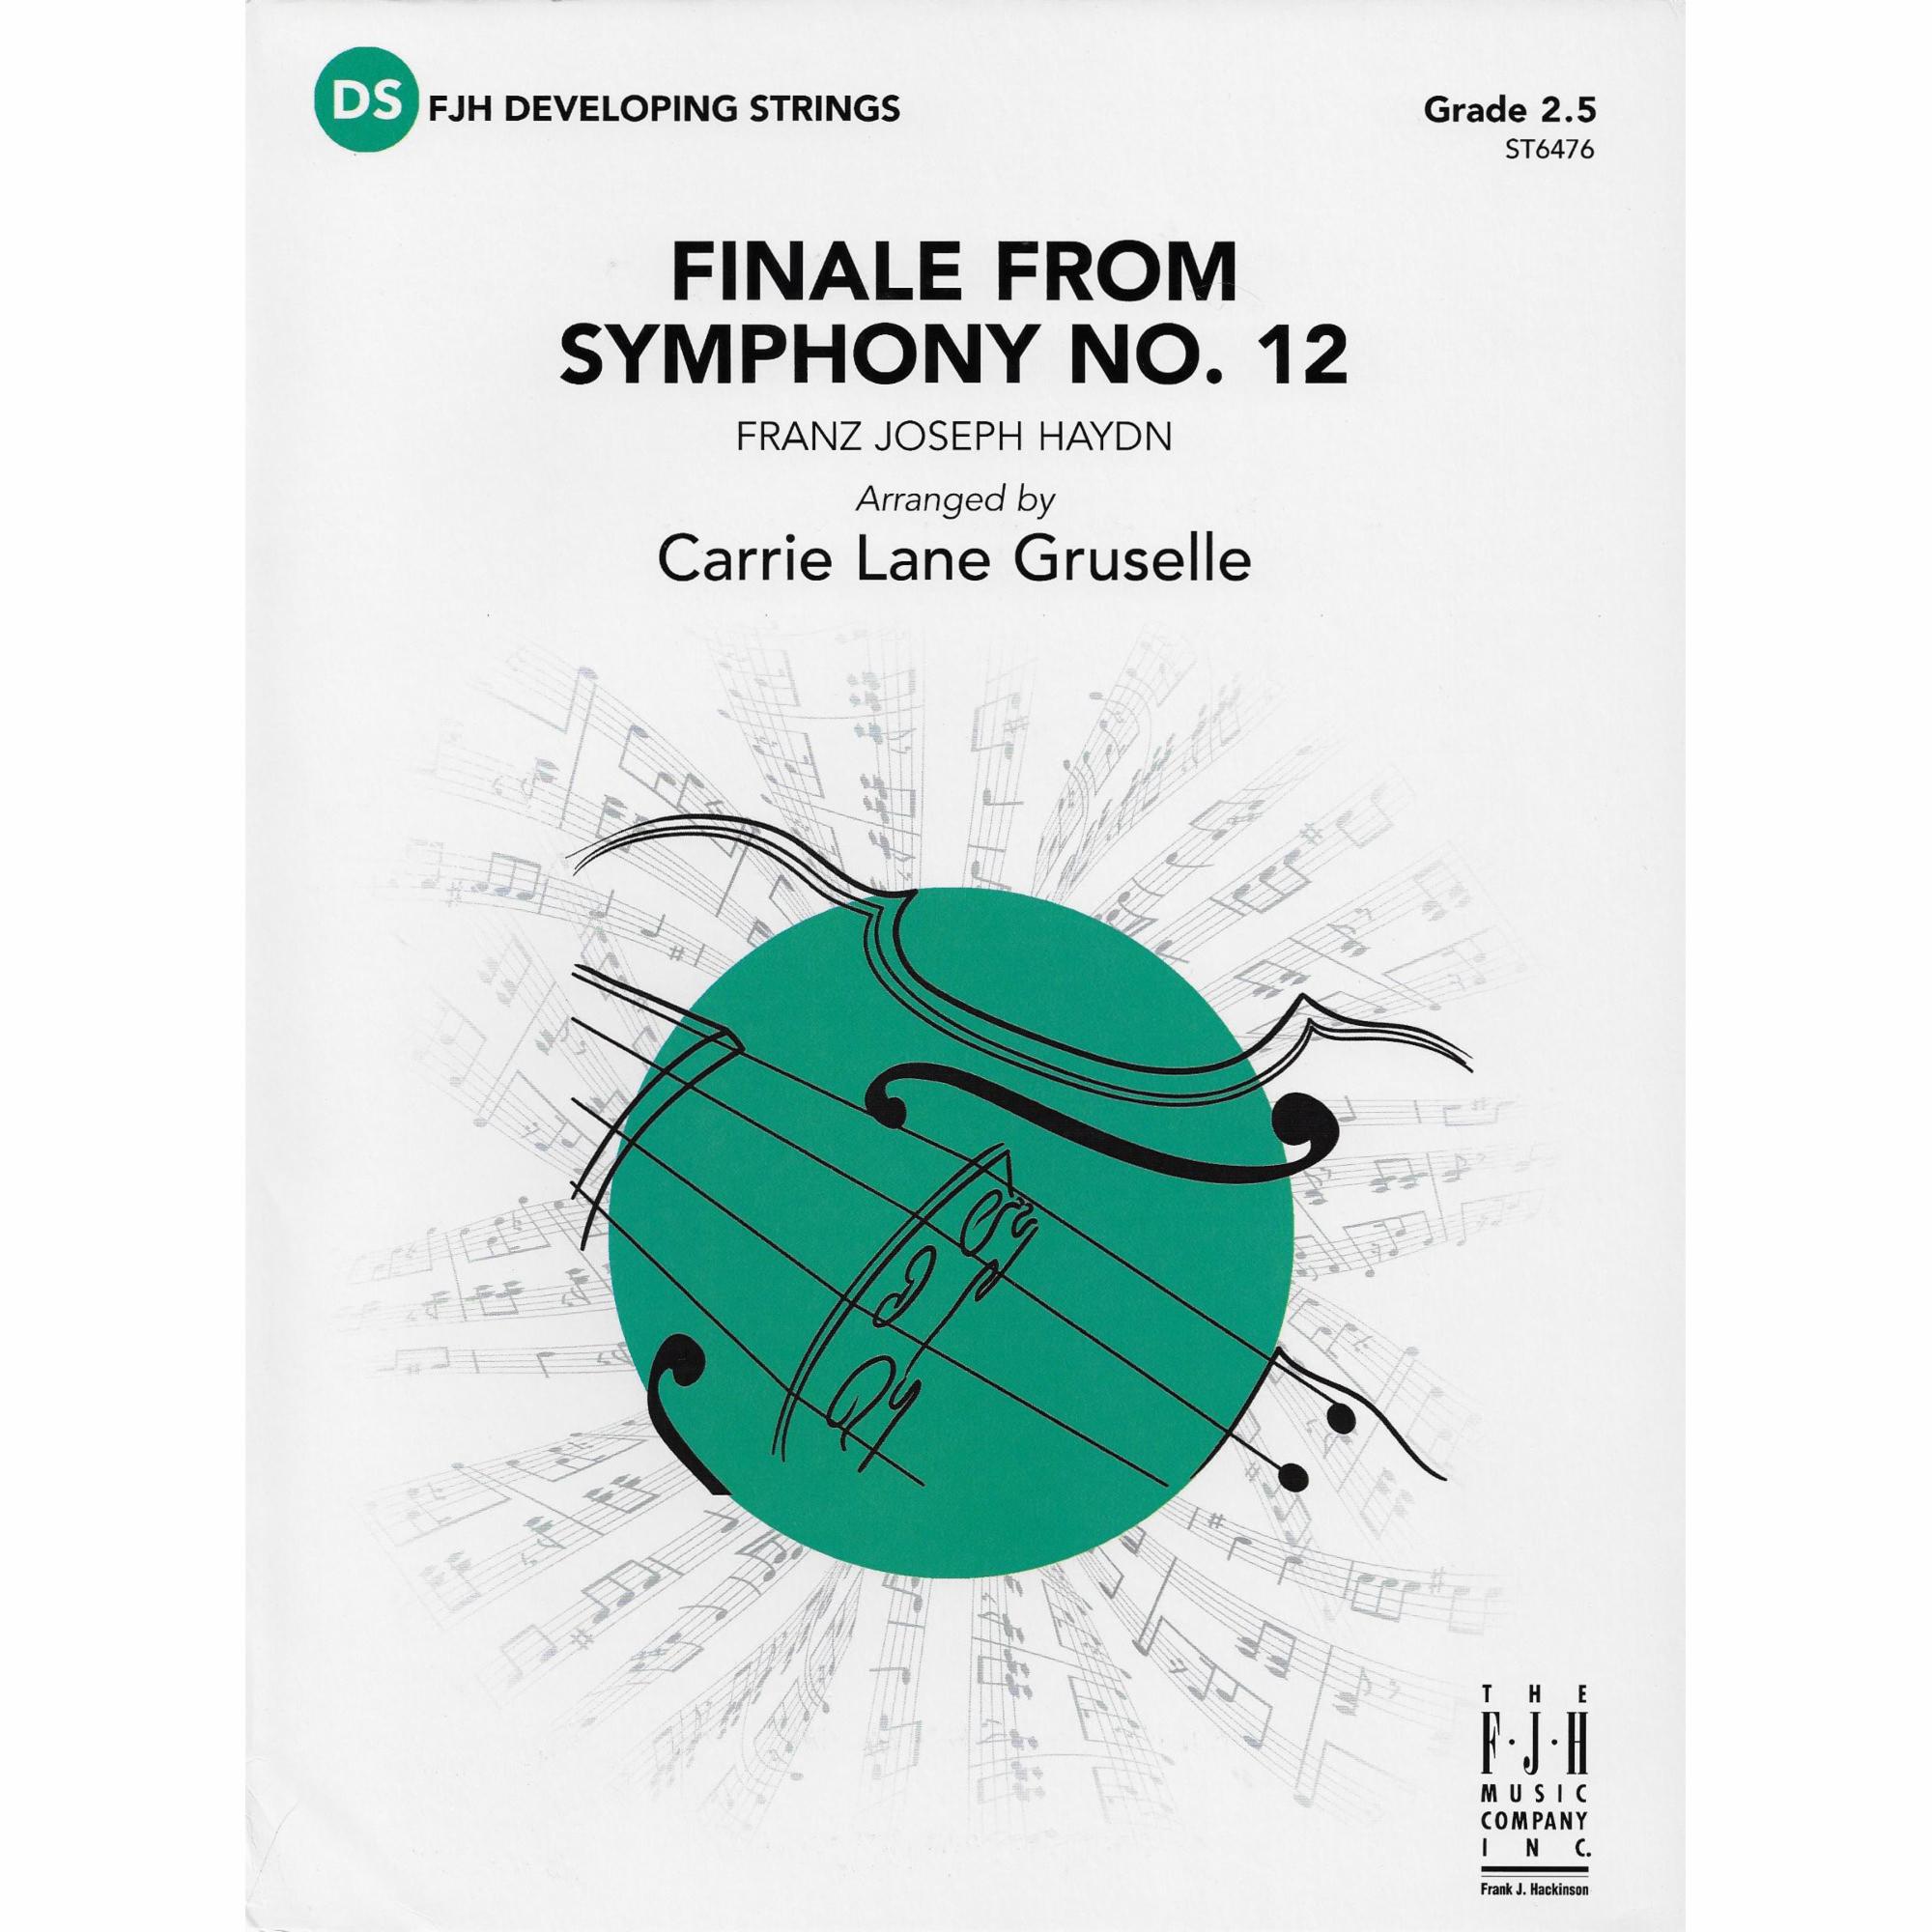 Finale from Symphony No. 12 for String Orchestra